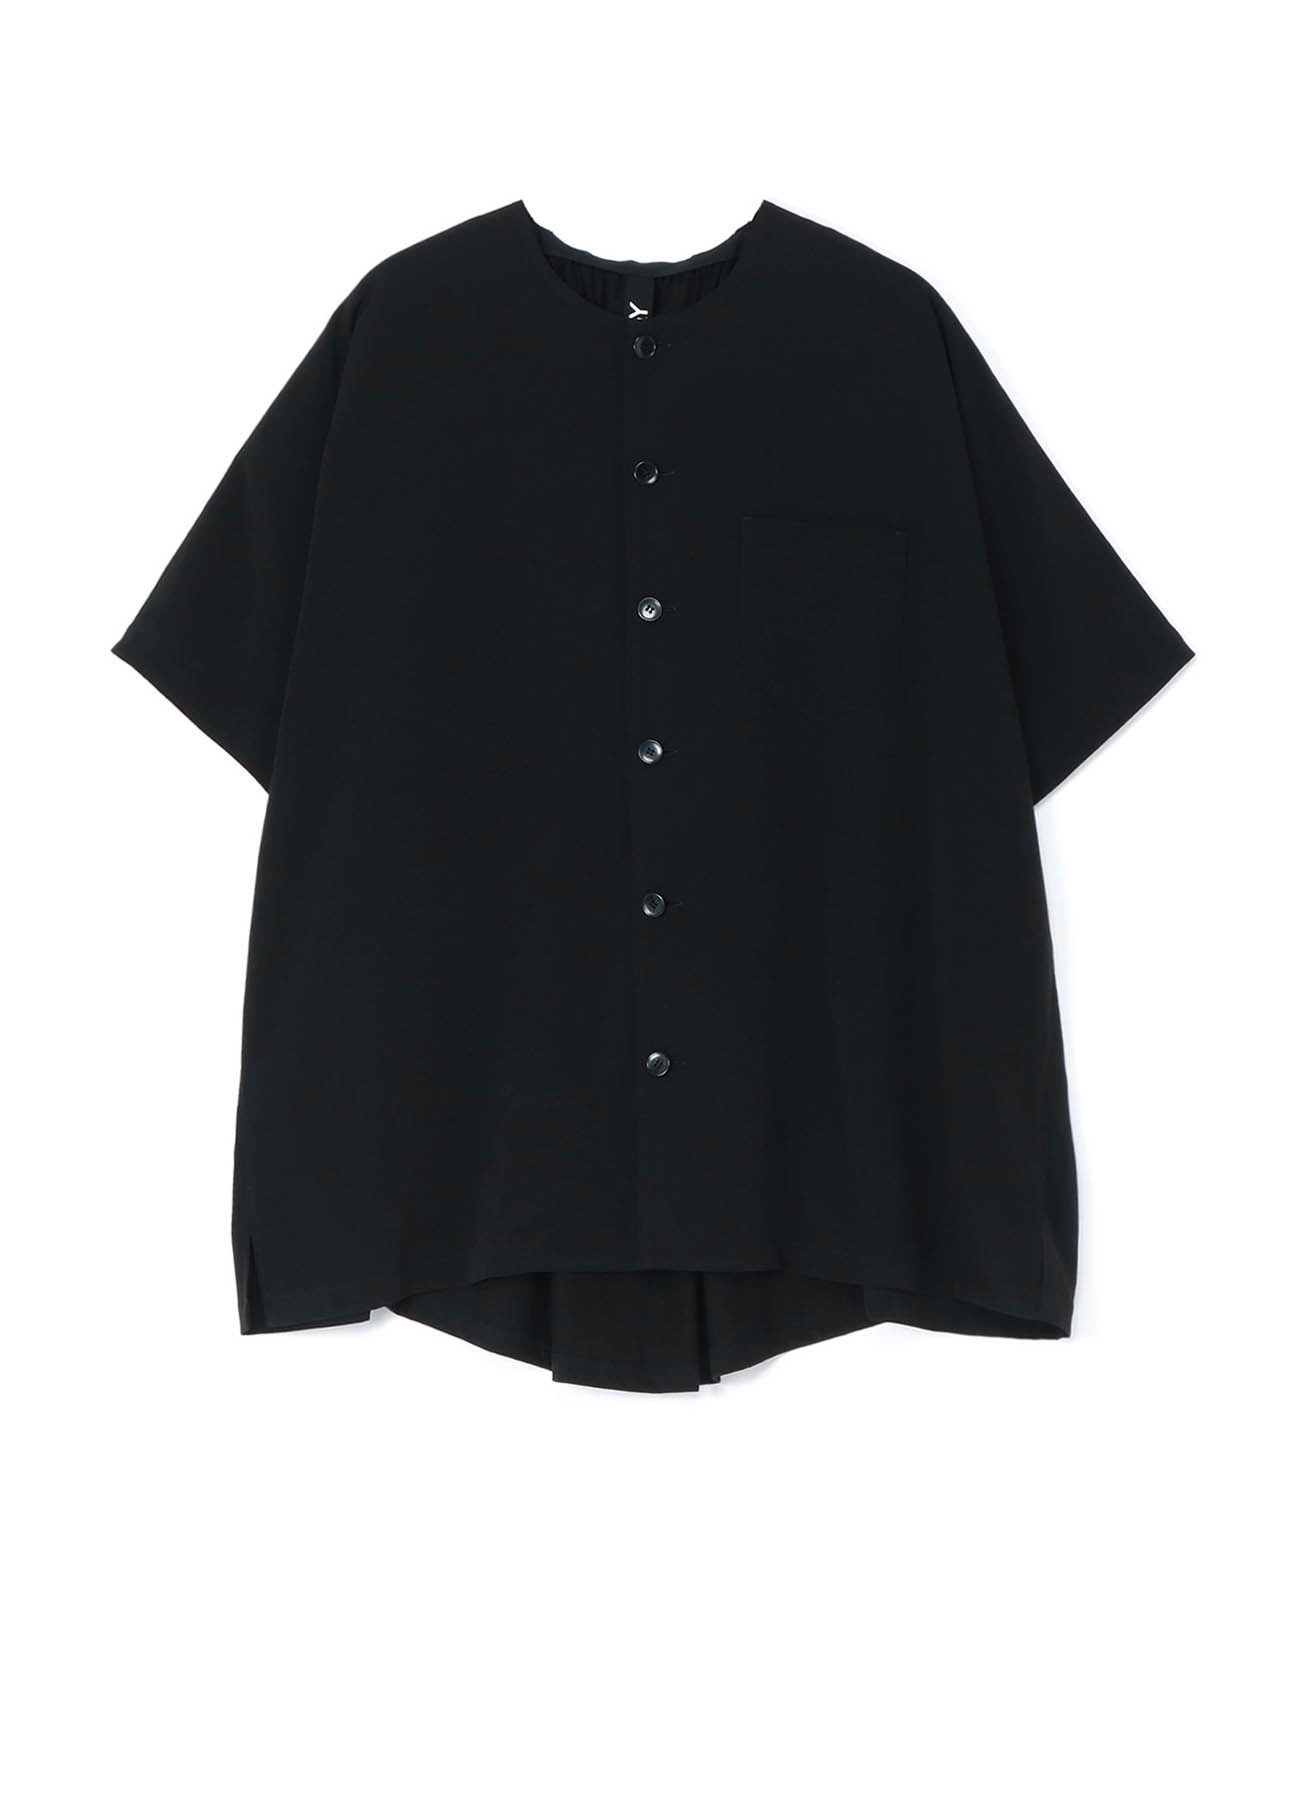 CREPE de CHINE + COTTON SHEETING BUTTON-UP T-SHIRT WITH BACK GATHERS